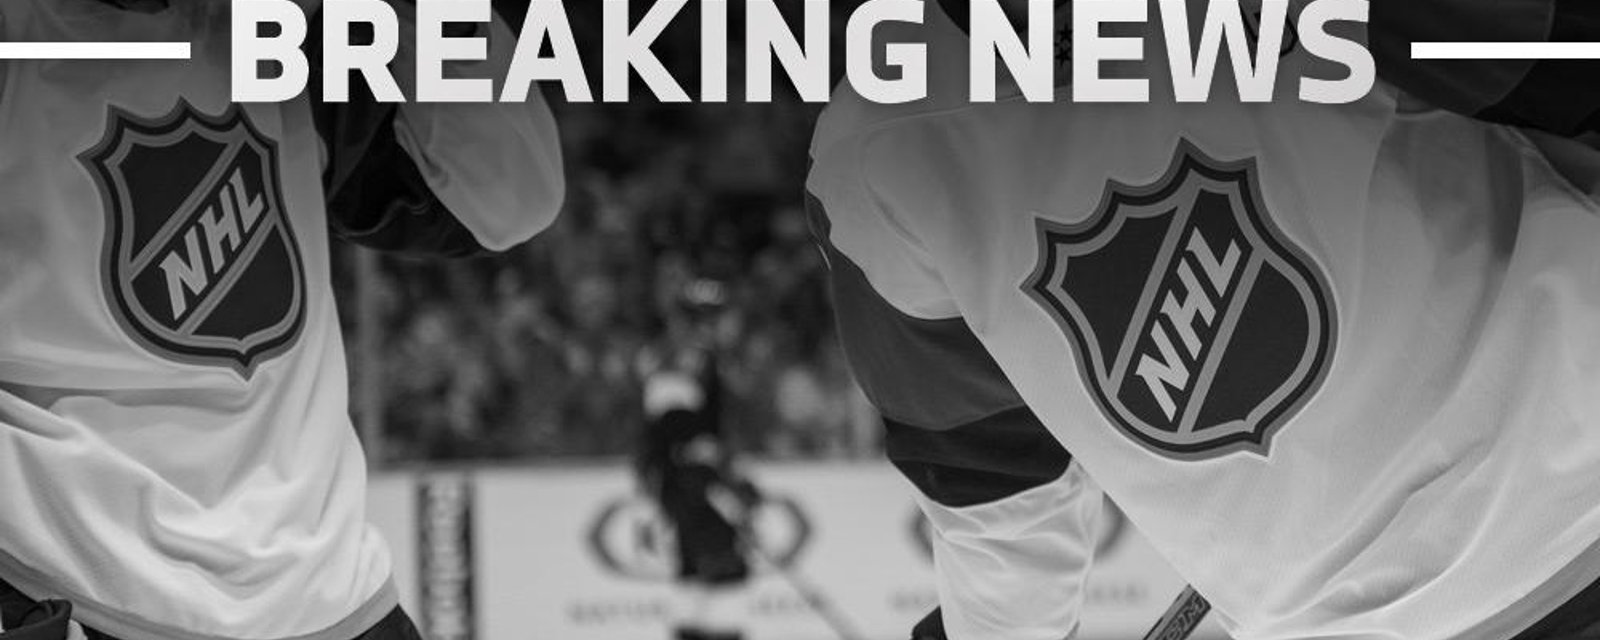 Thirteen year NHL veteran could be leaving for the KHL.